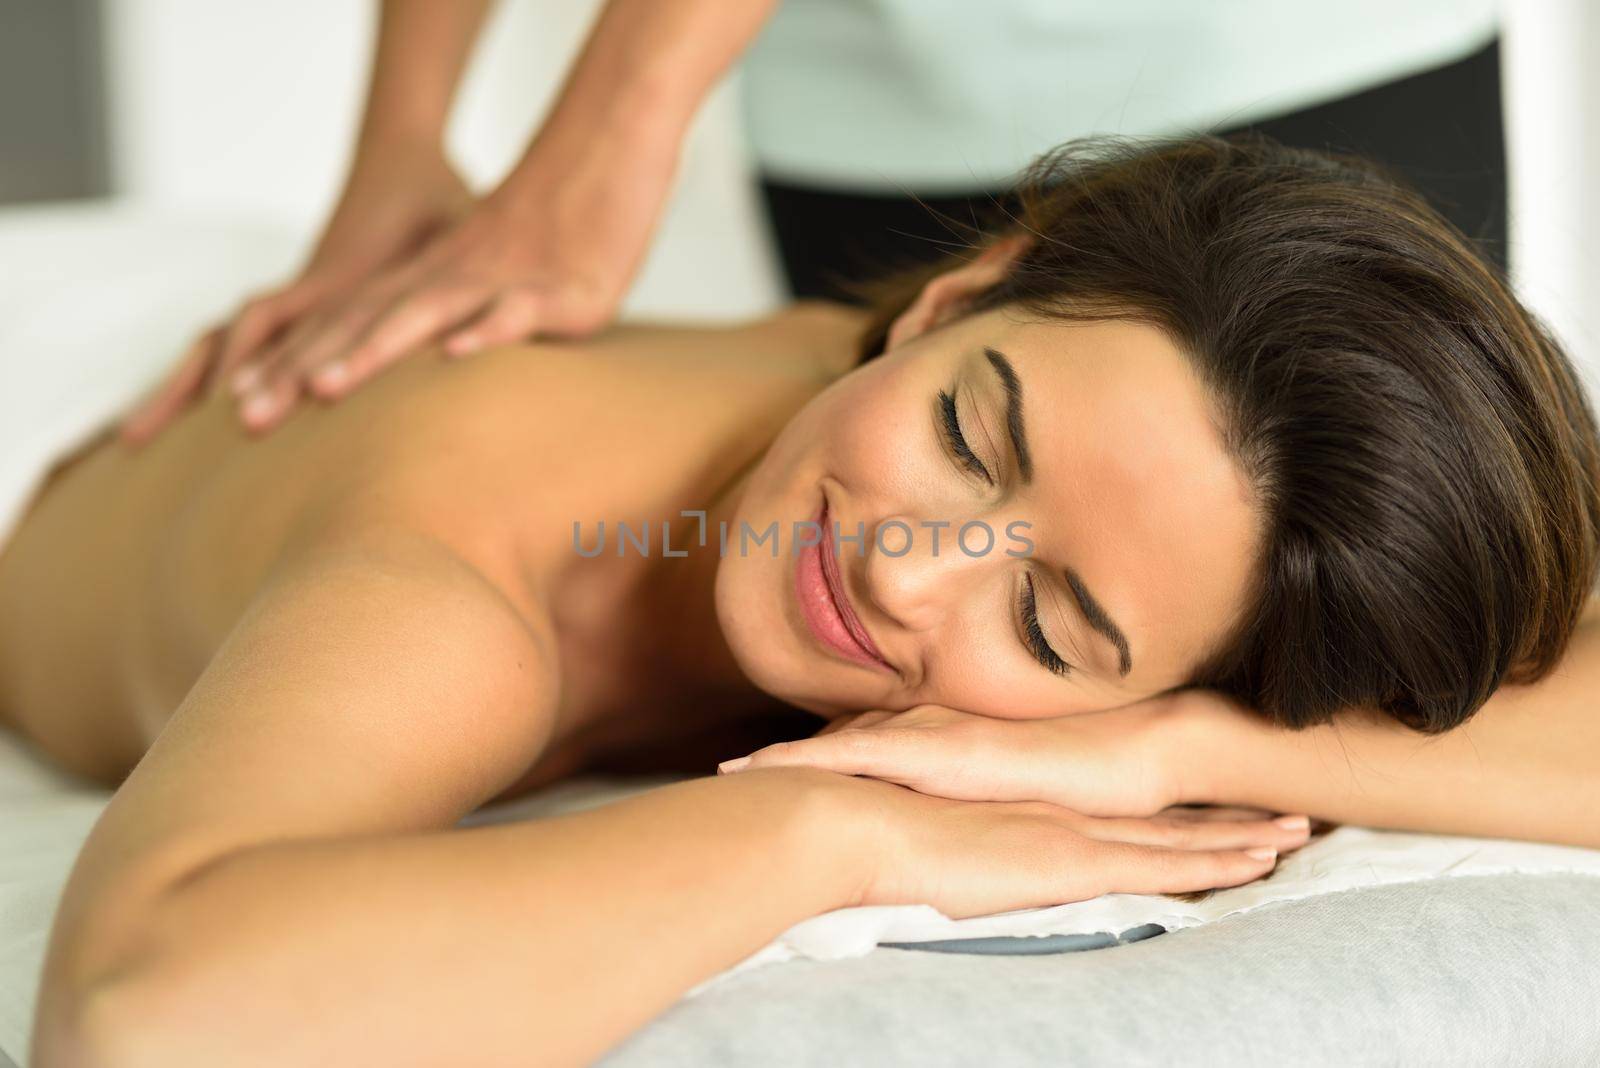 Young female receiving a relaxing back massage in a spa center. Brunette woman patient is receiving treatment by professional therapist.